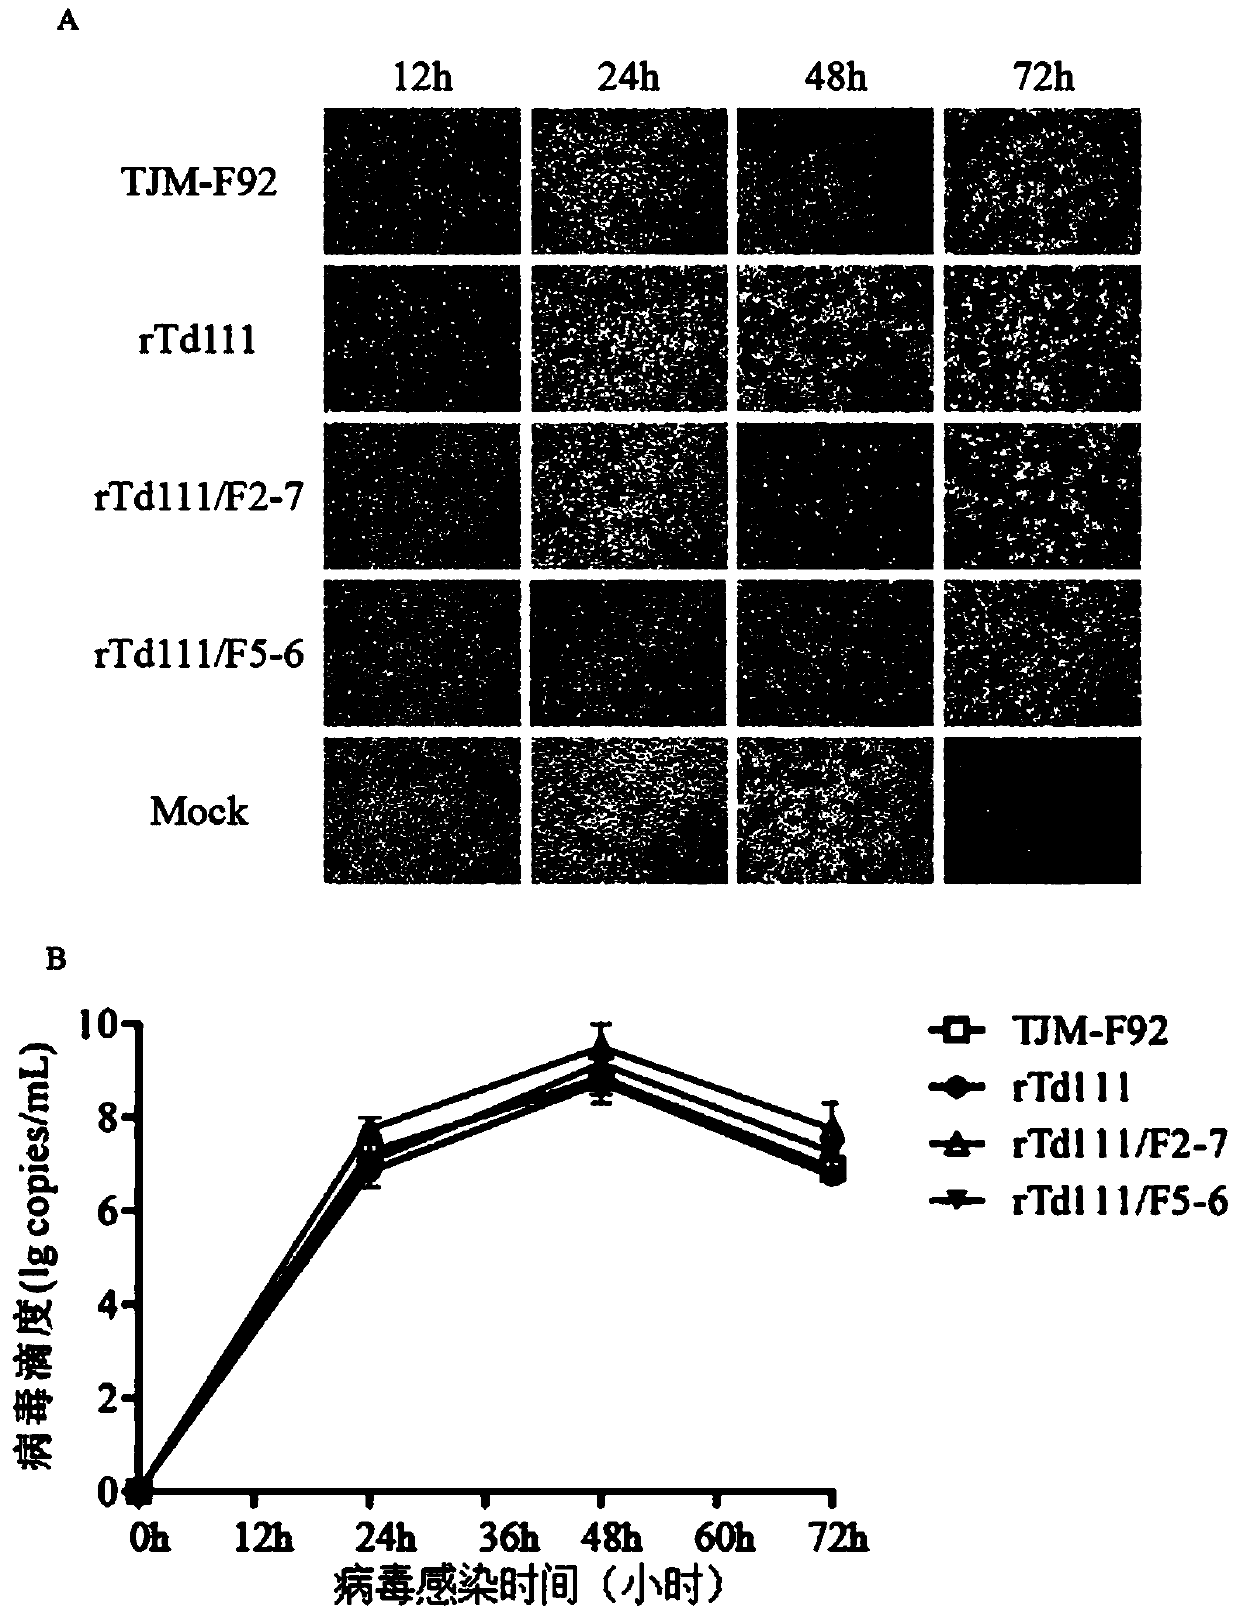 Chimeric strain of porcine reproductive and respiratory syndrome virus and application thereof